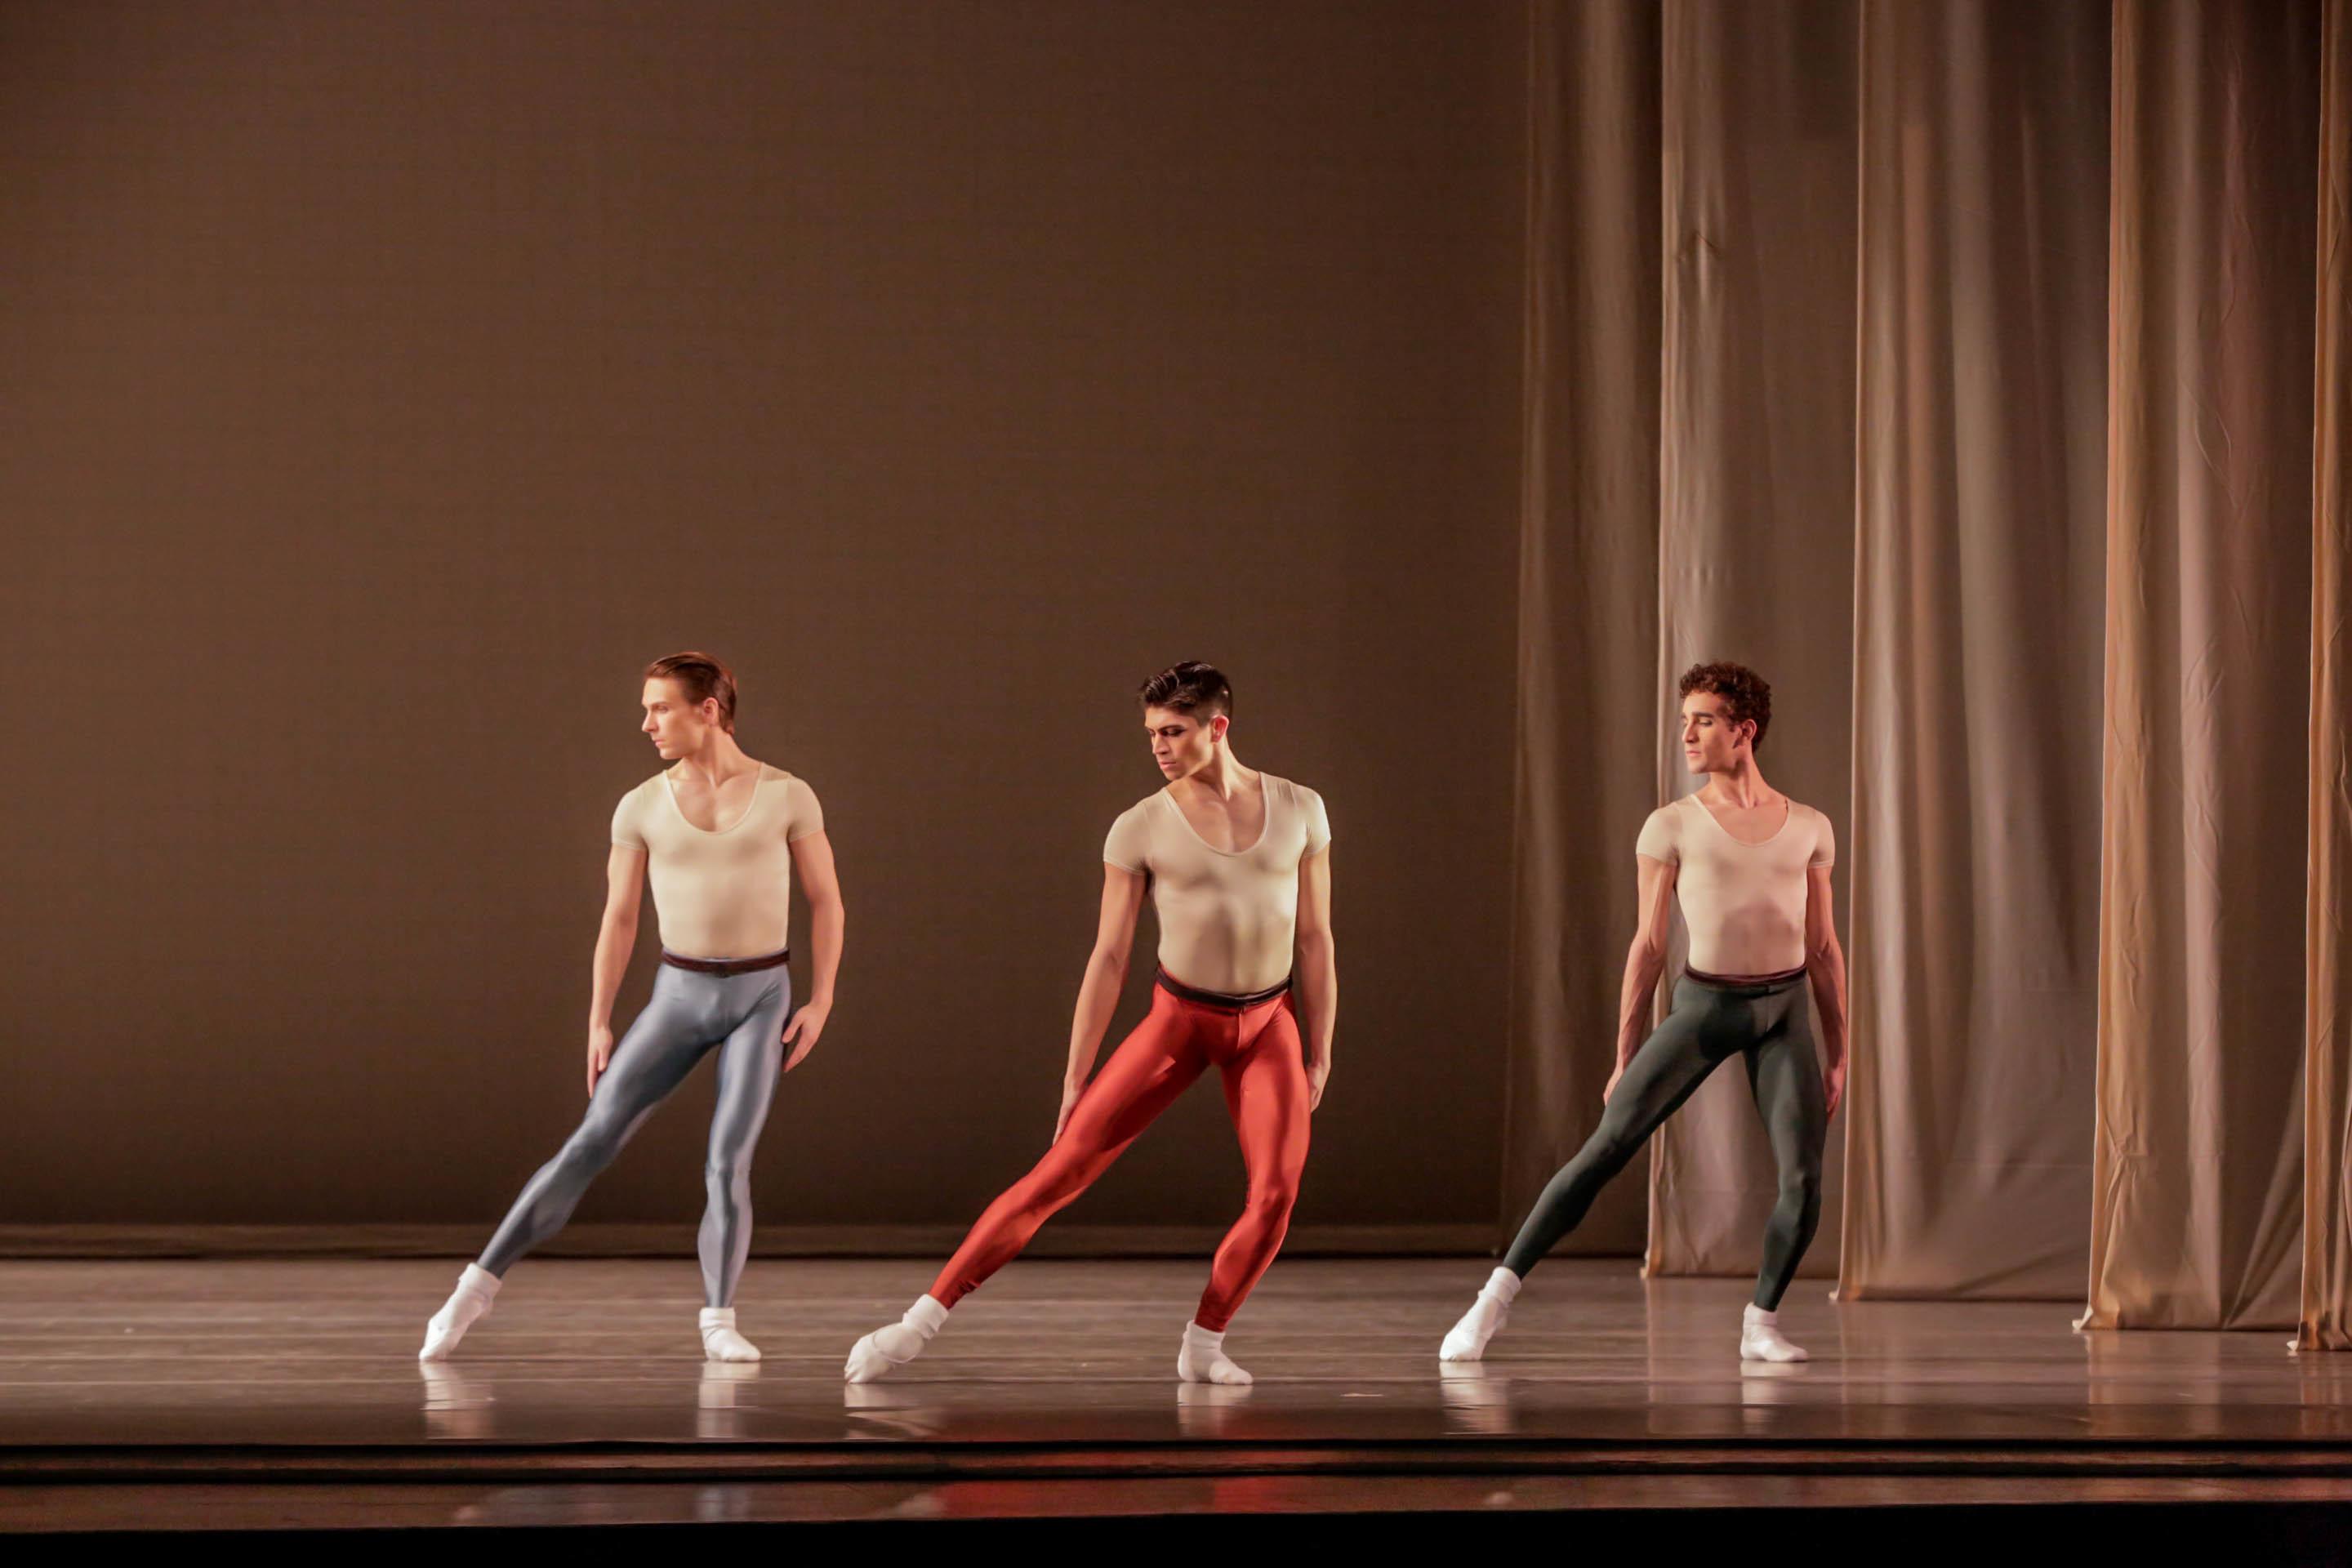 Dancers Graham Maverick, Aaron Renteria and Edson Barbosa in “Glass Pieces.” (Photo by Cheryl Mann)